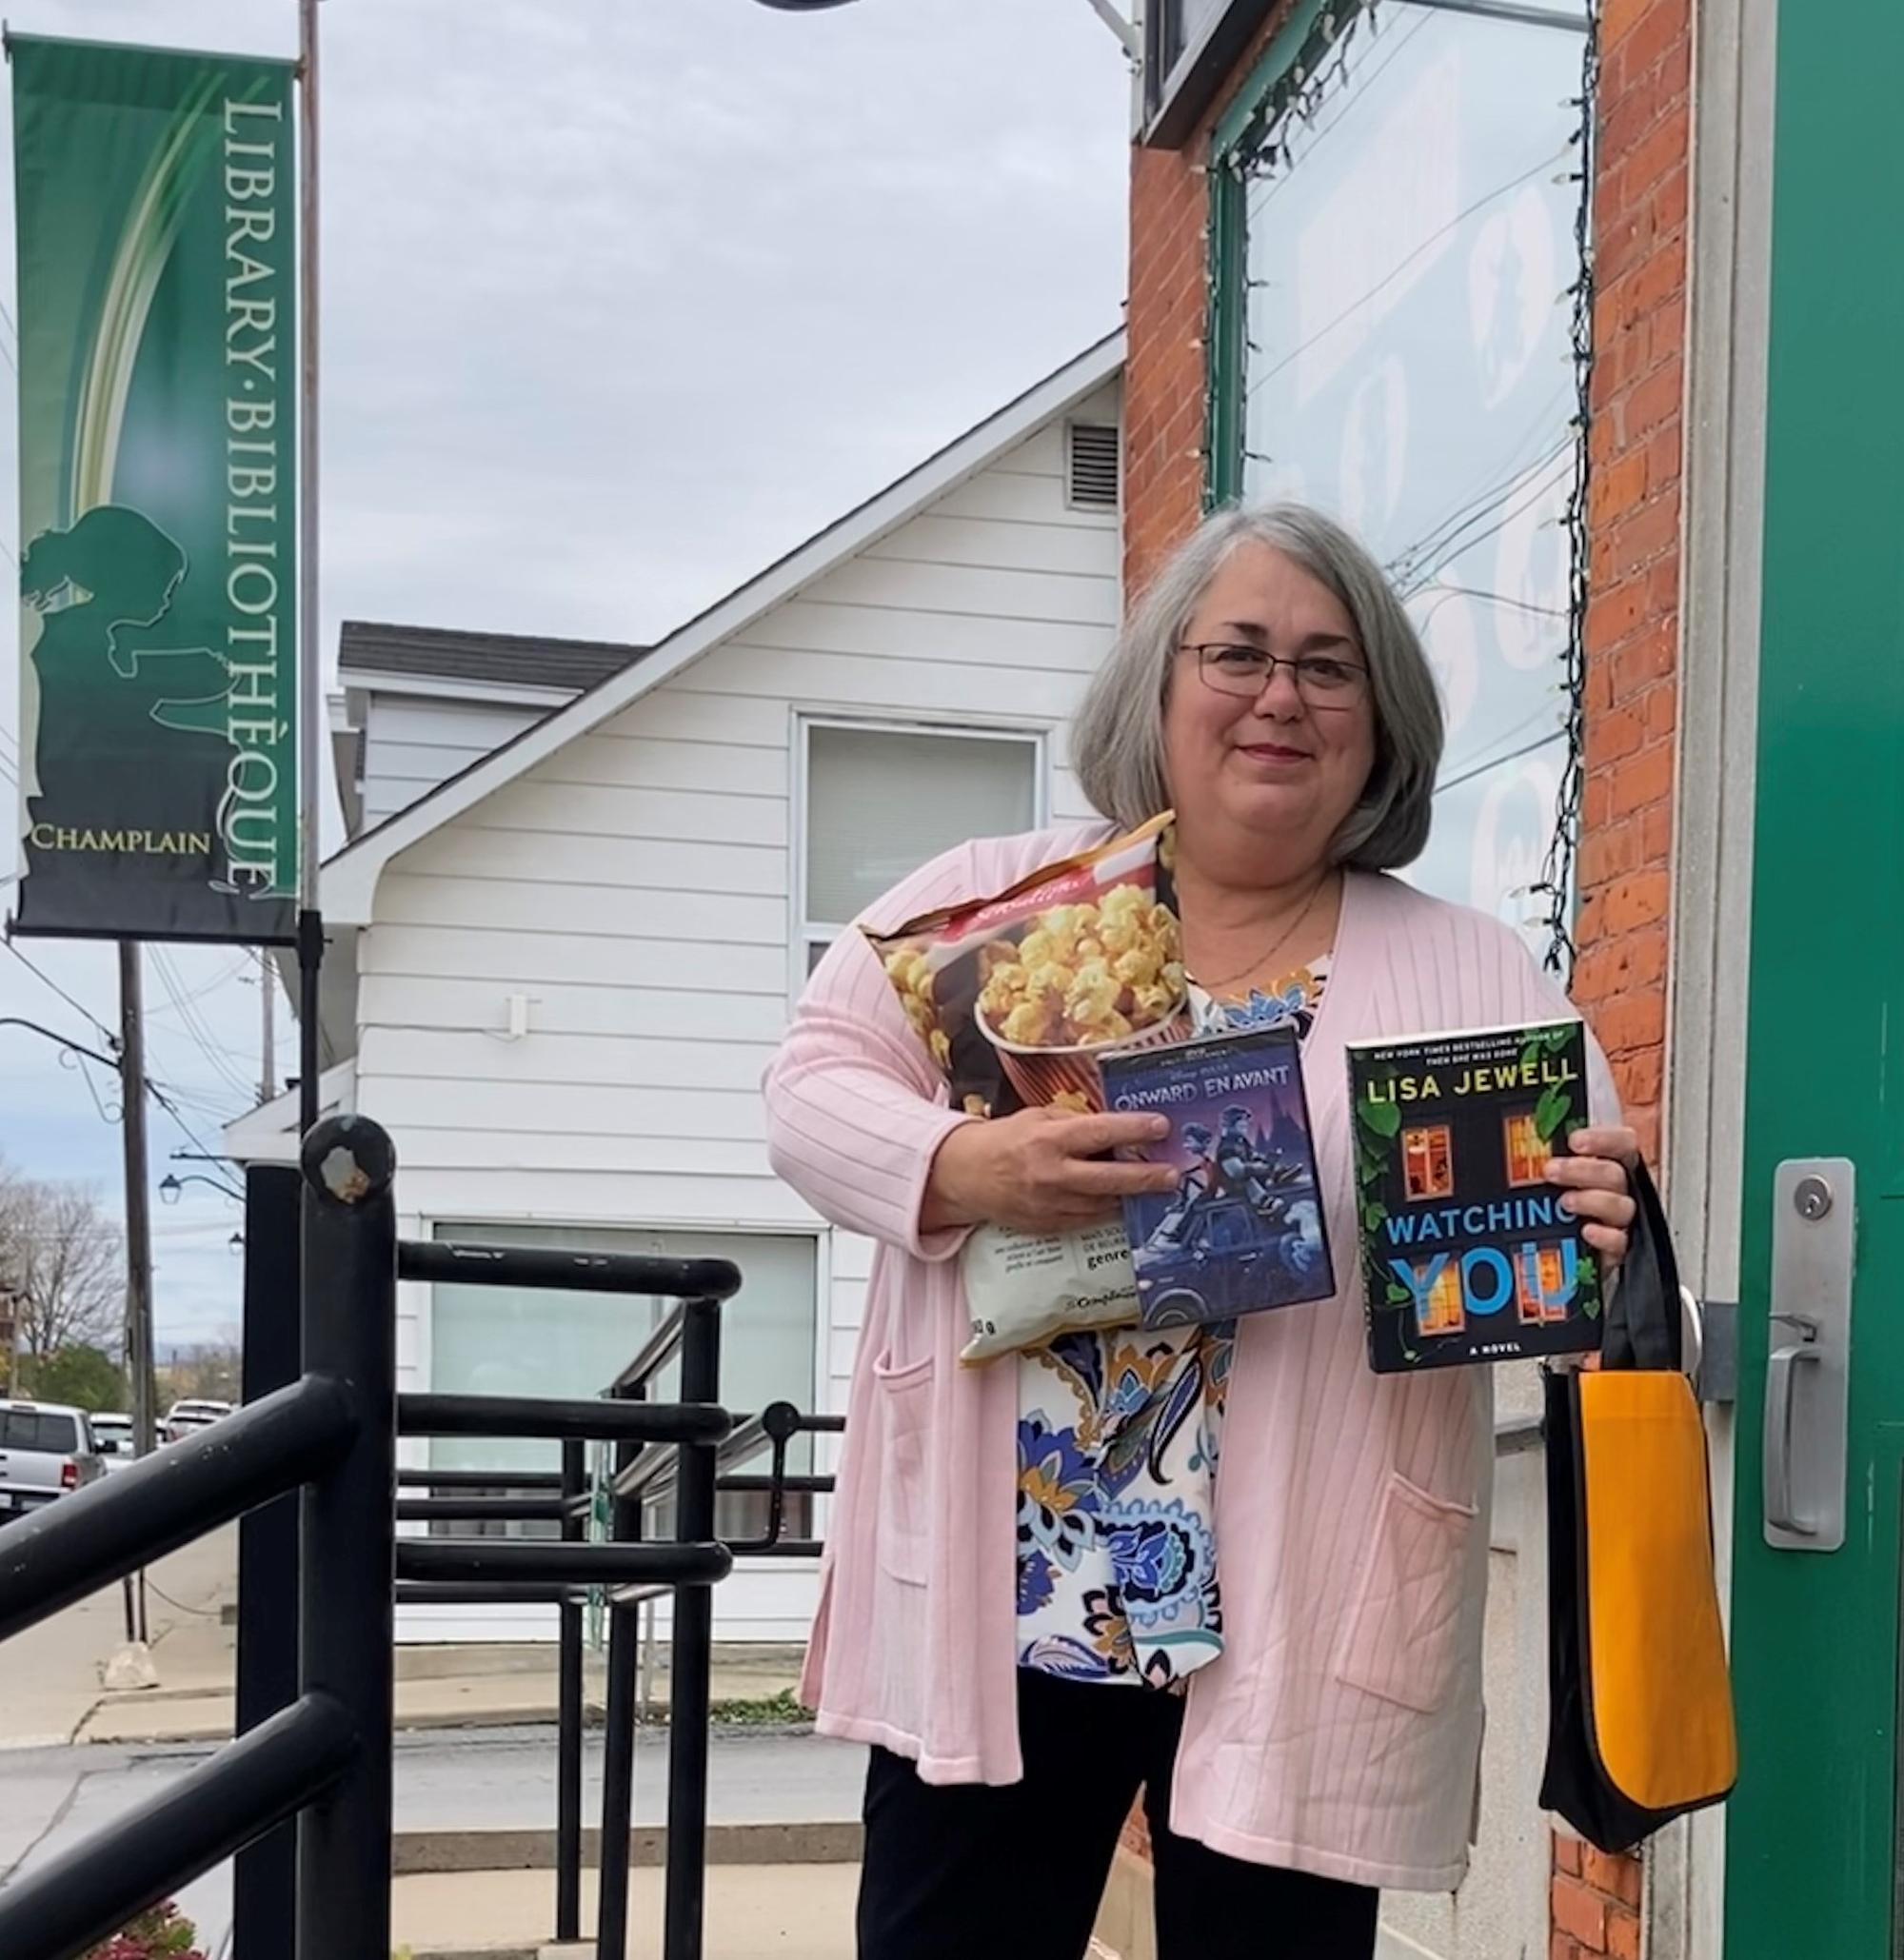 New library member wins prize